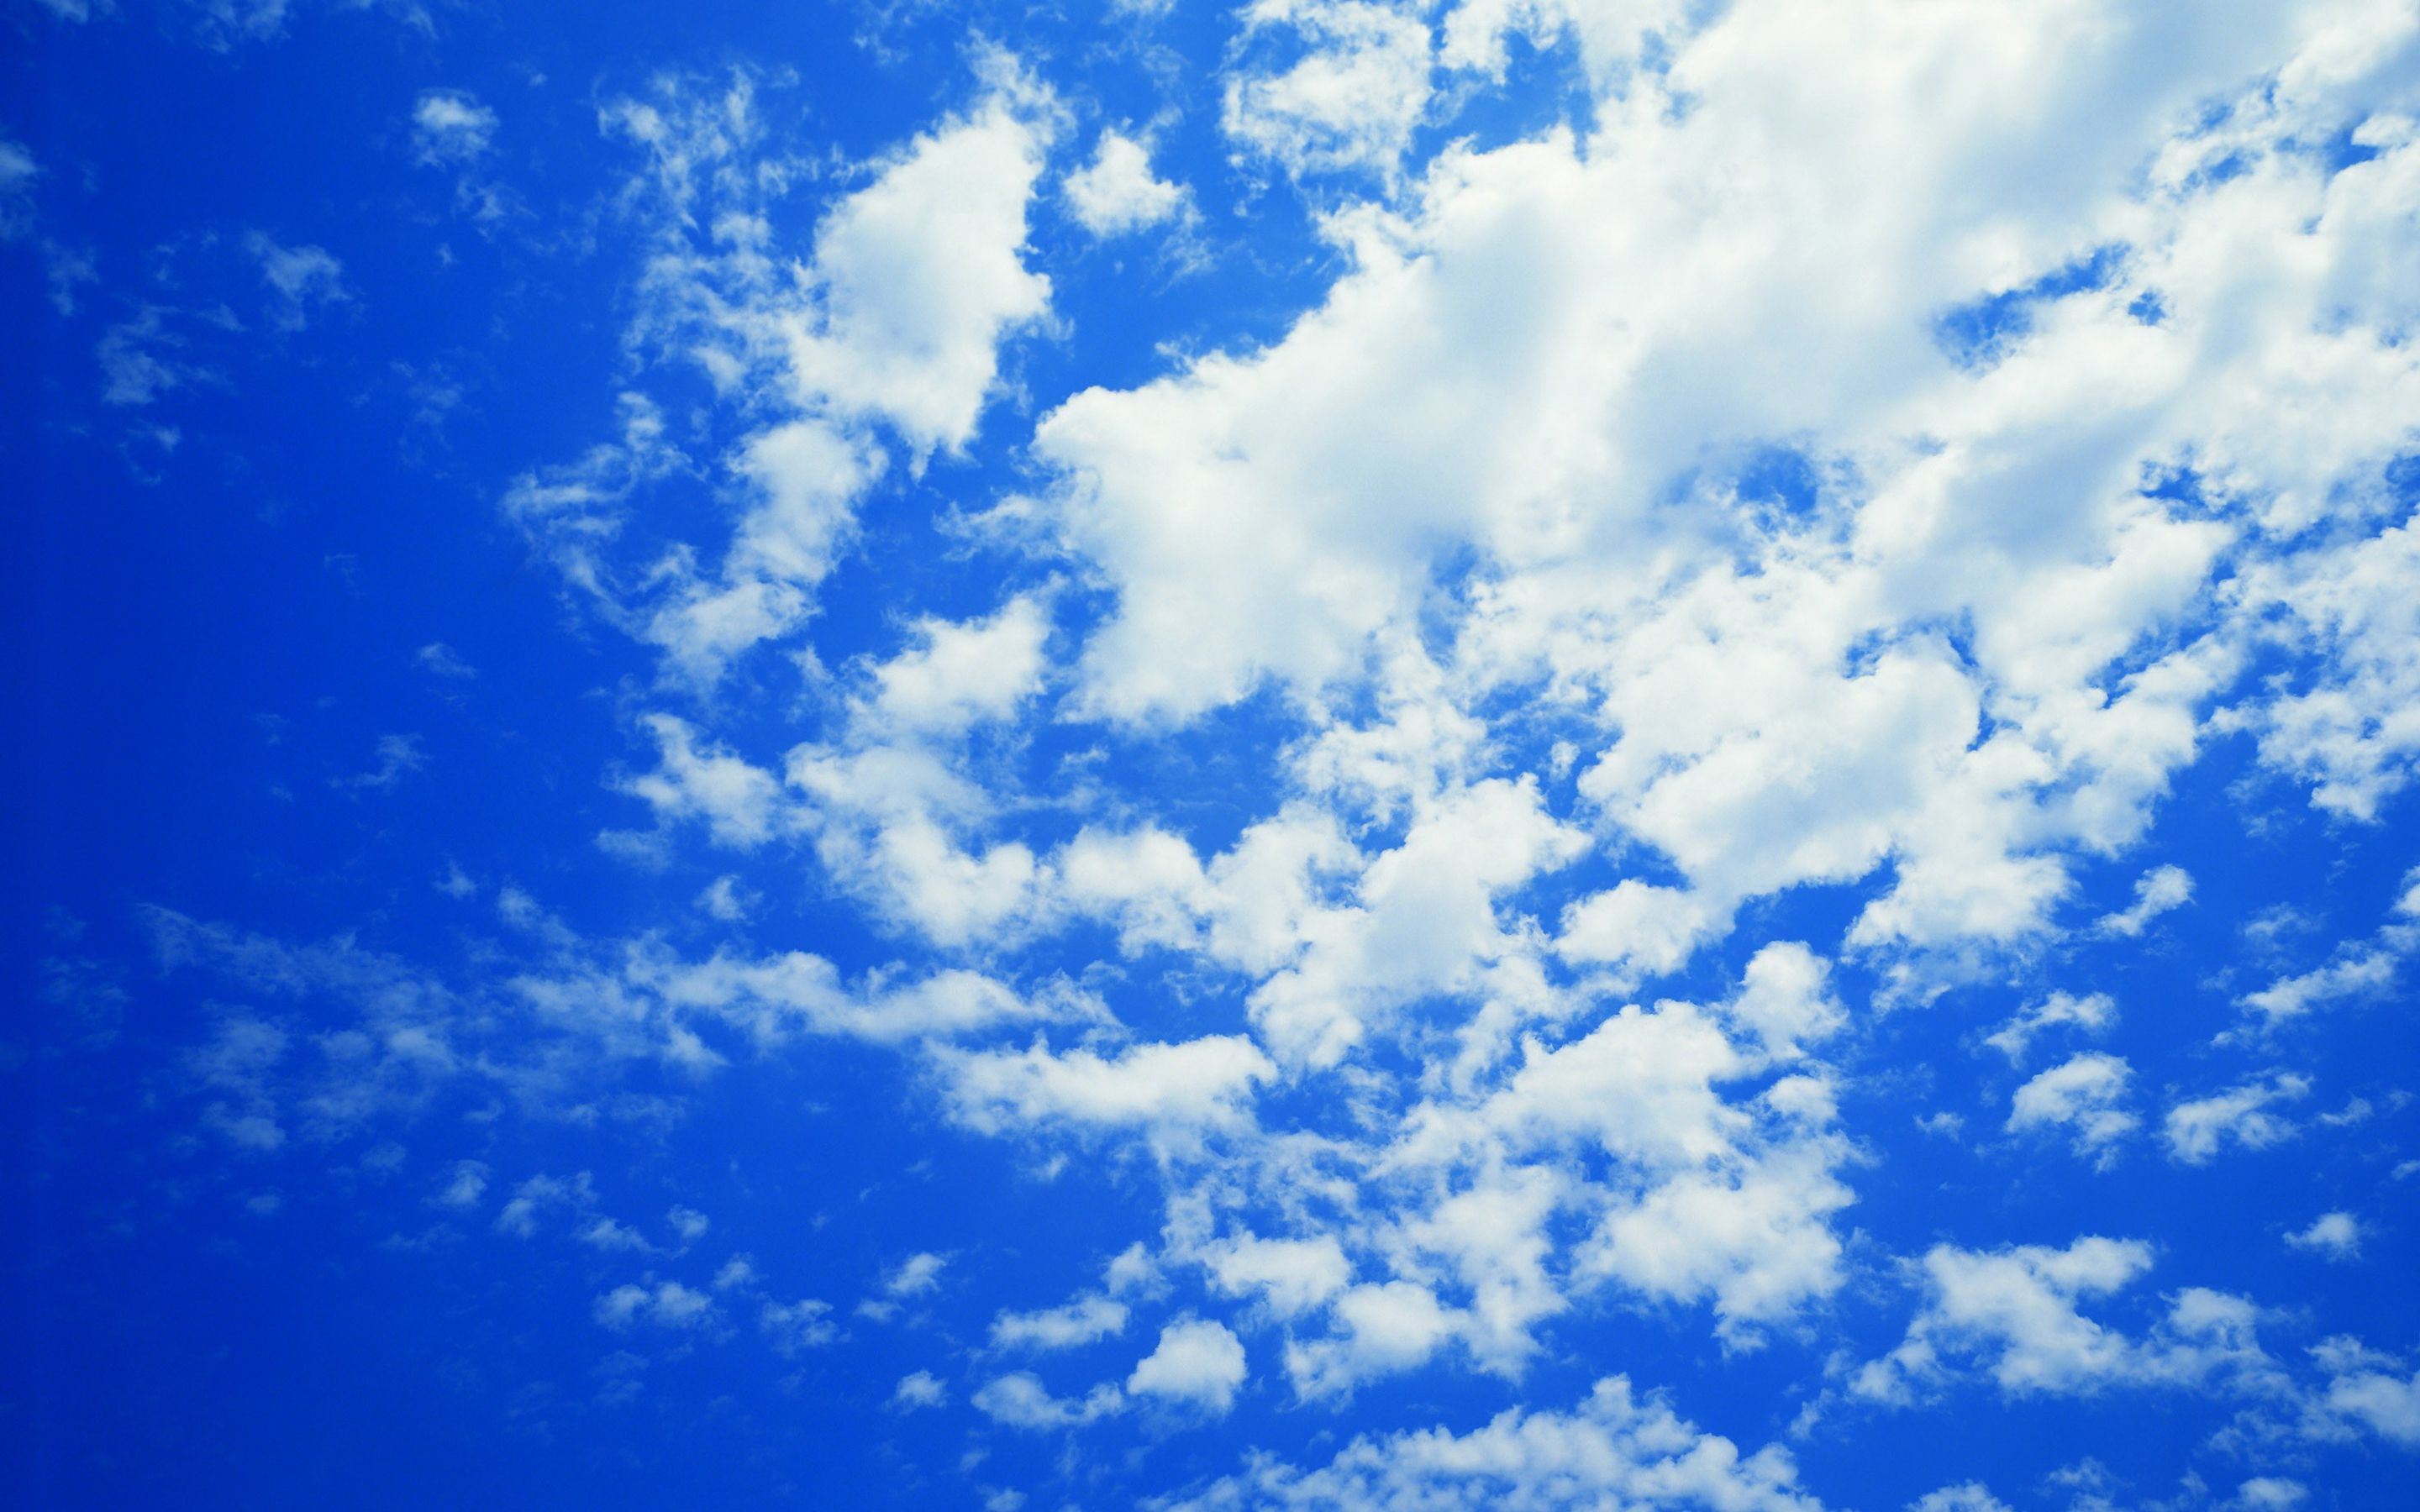 Blue Sky And Clouds Wallpaper | Best Games Wallpapers | Pinterest ...